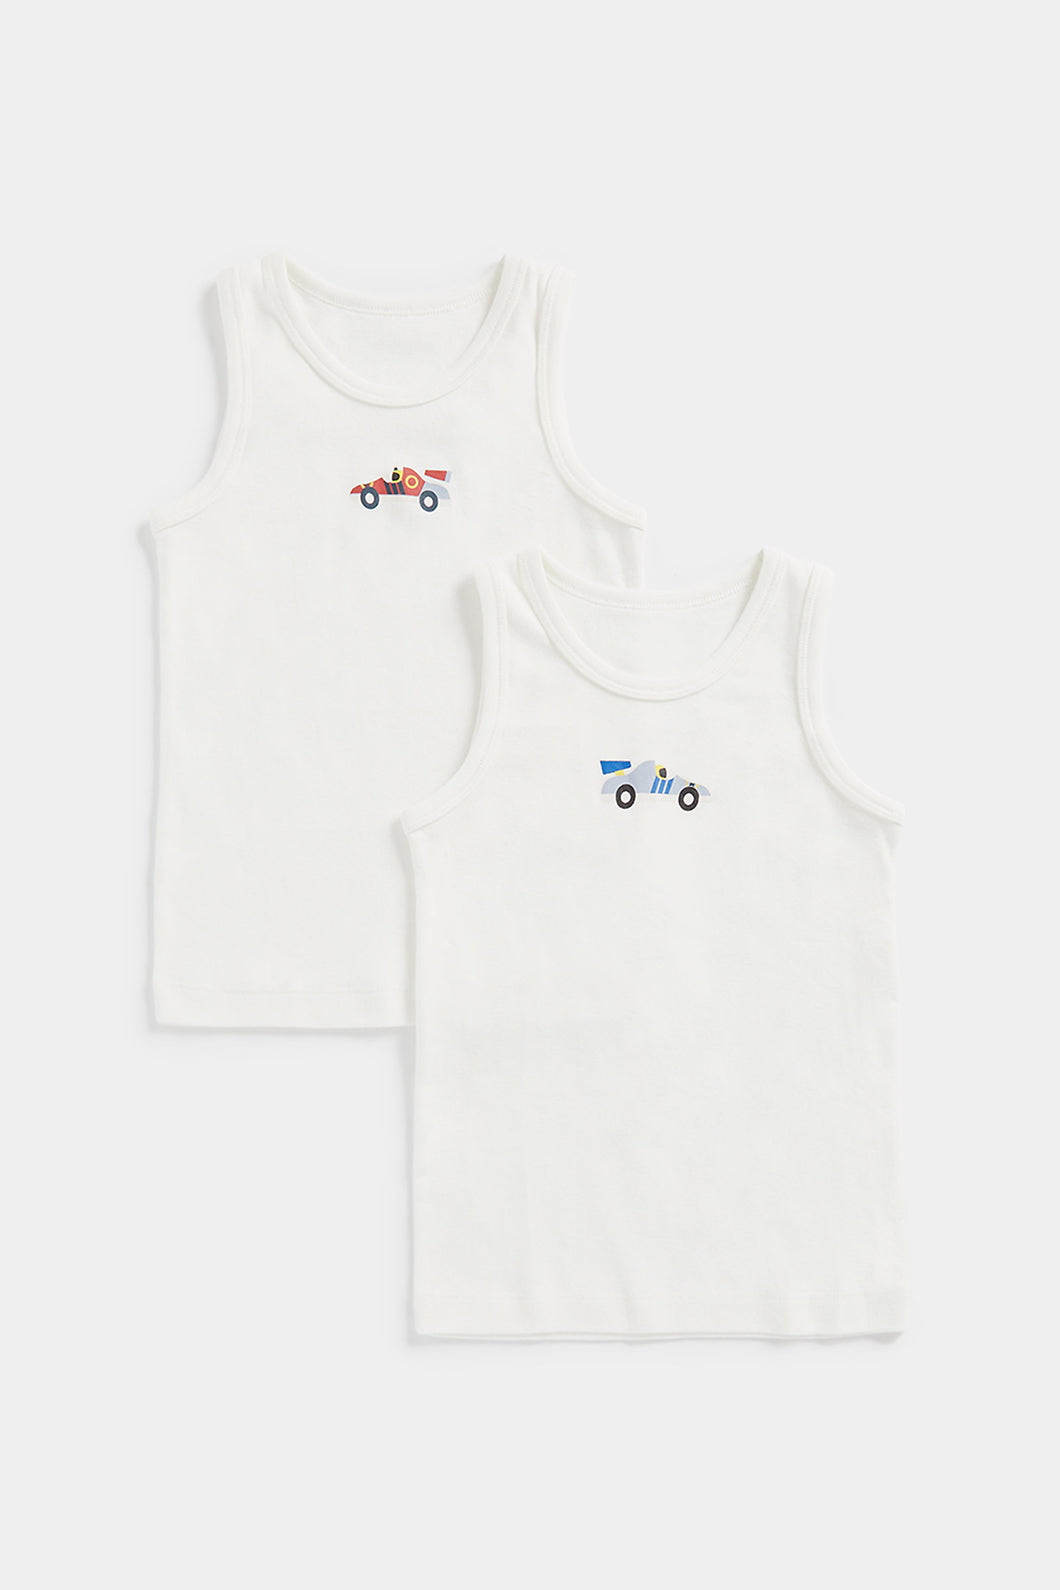 Mothercare Car Sleeveless Vests - 2 Pack